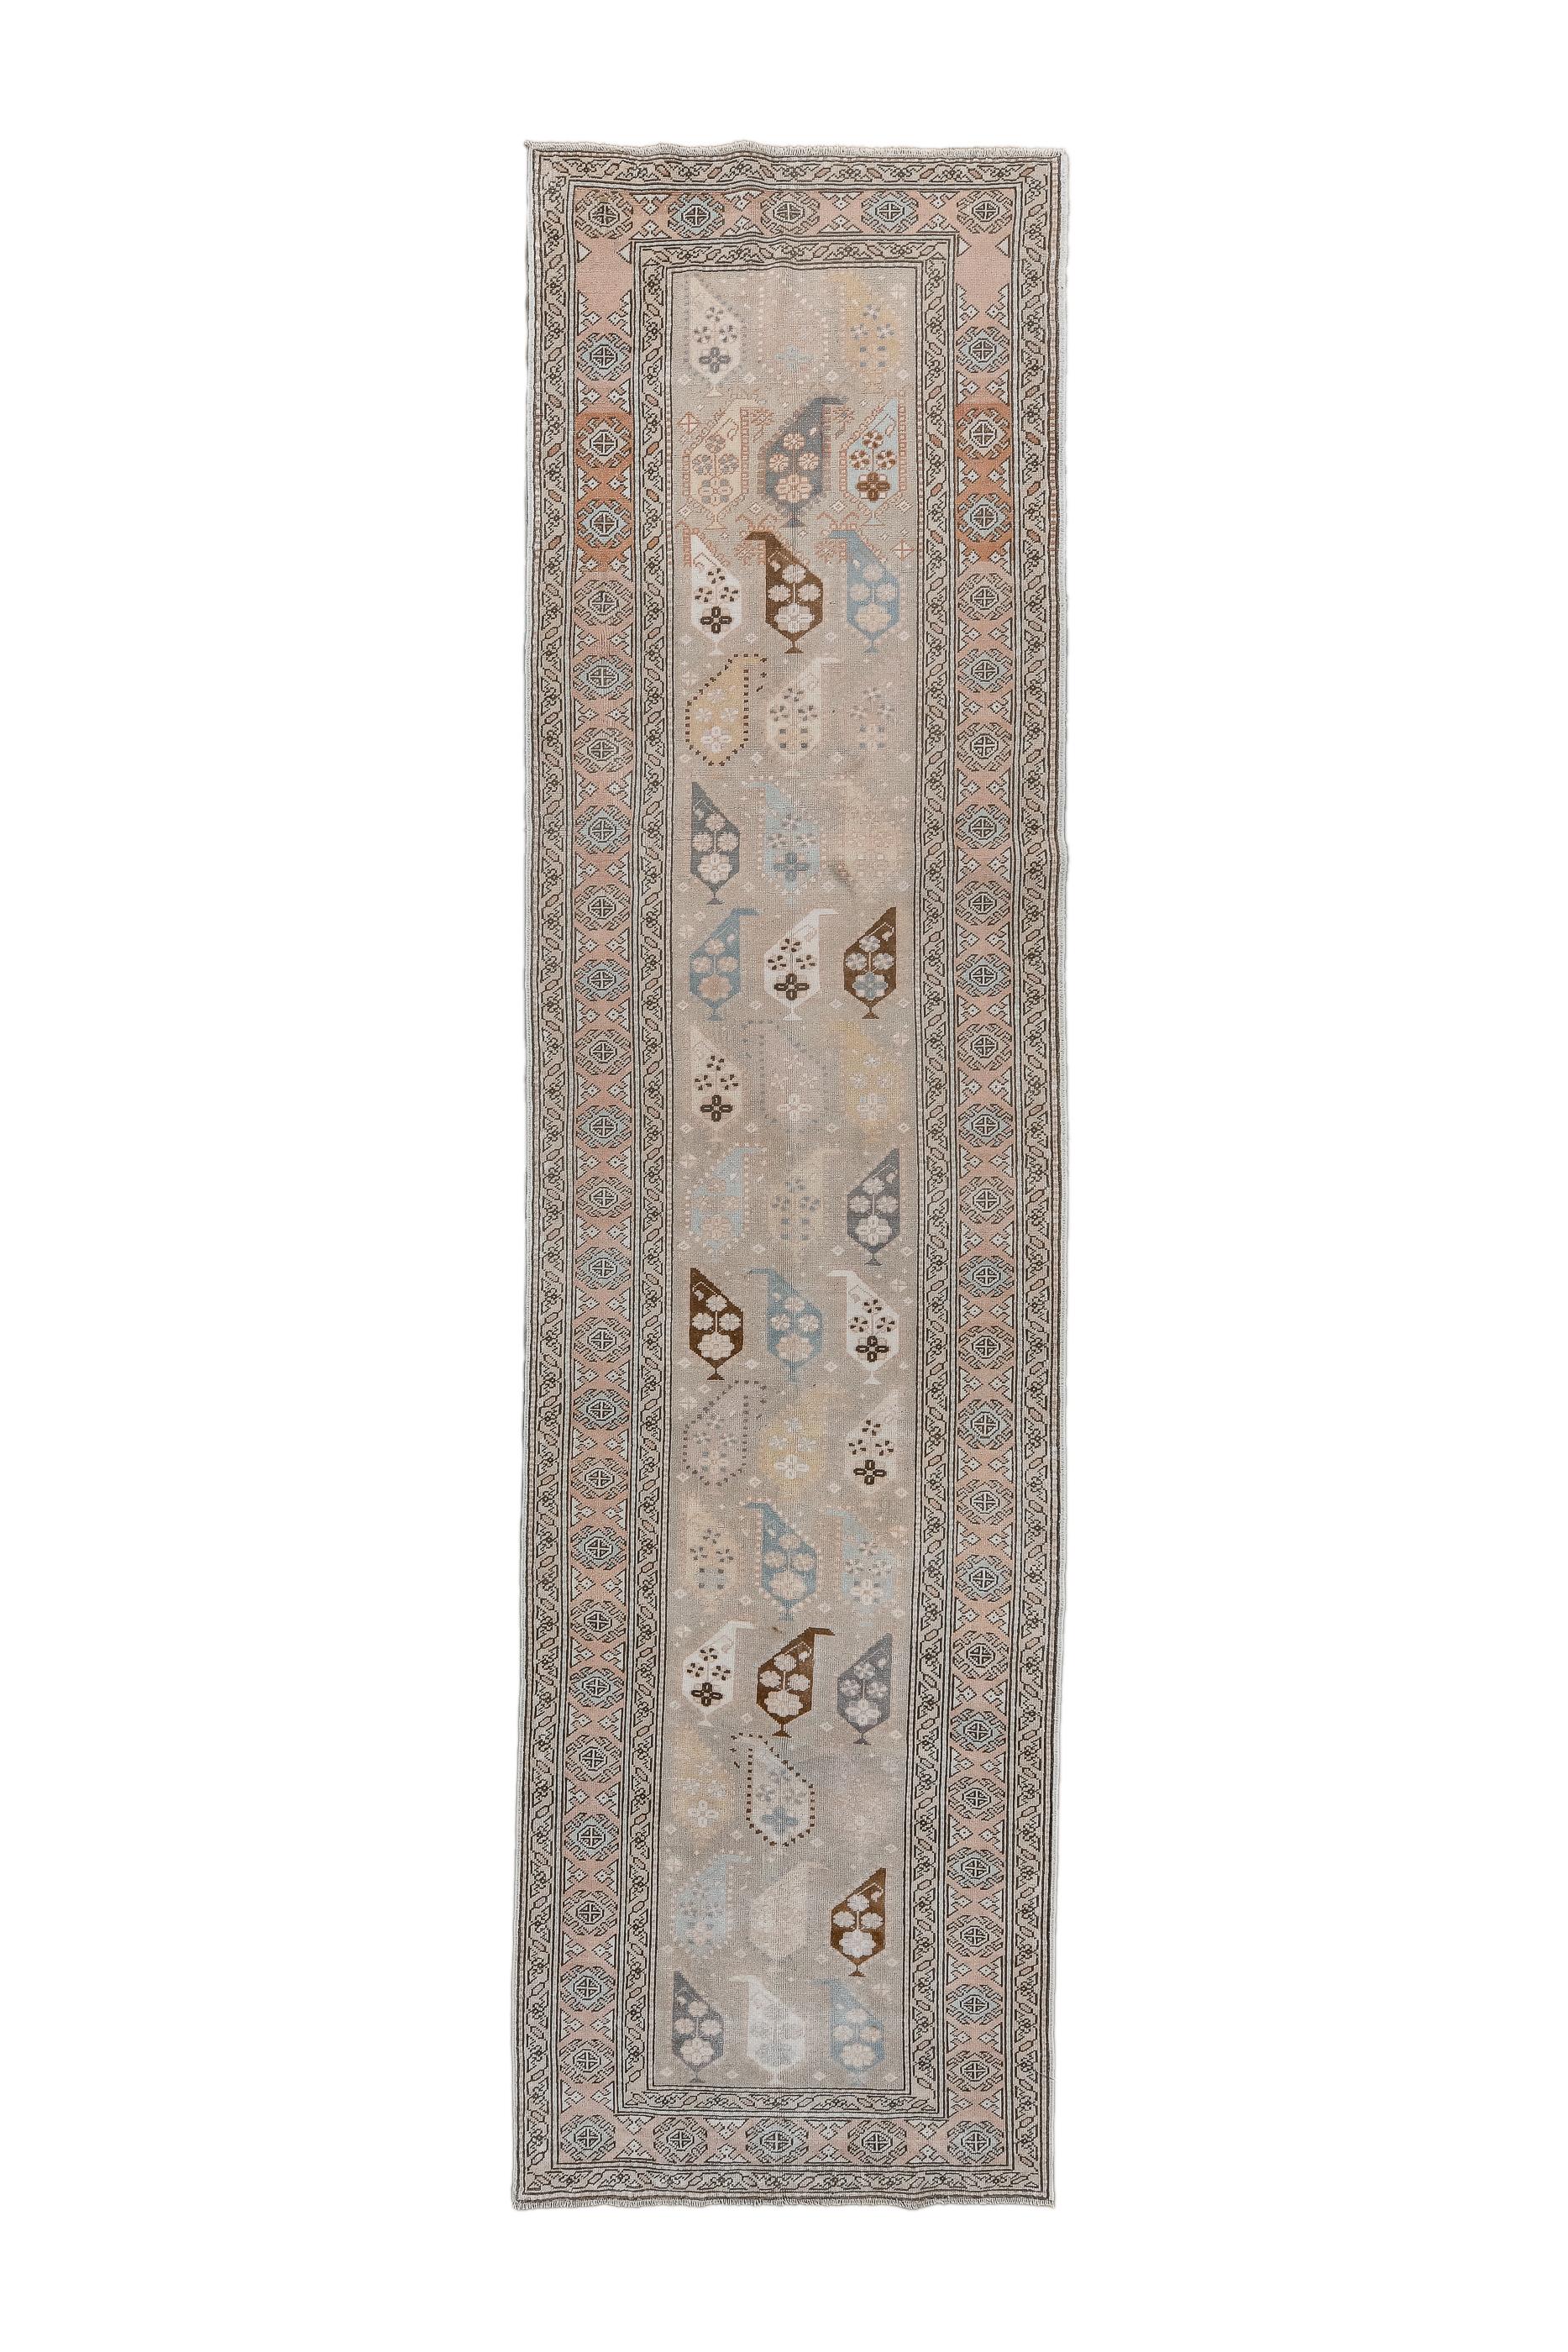 This usefully narrow kenare (runner) shows a traditional, ever-popular design of cascading, upright, stylised and footed botehs on a light ground. Geometric main border of rosettes, brackets, and triangular fillers. Generally reduced tonality with